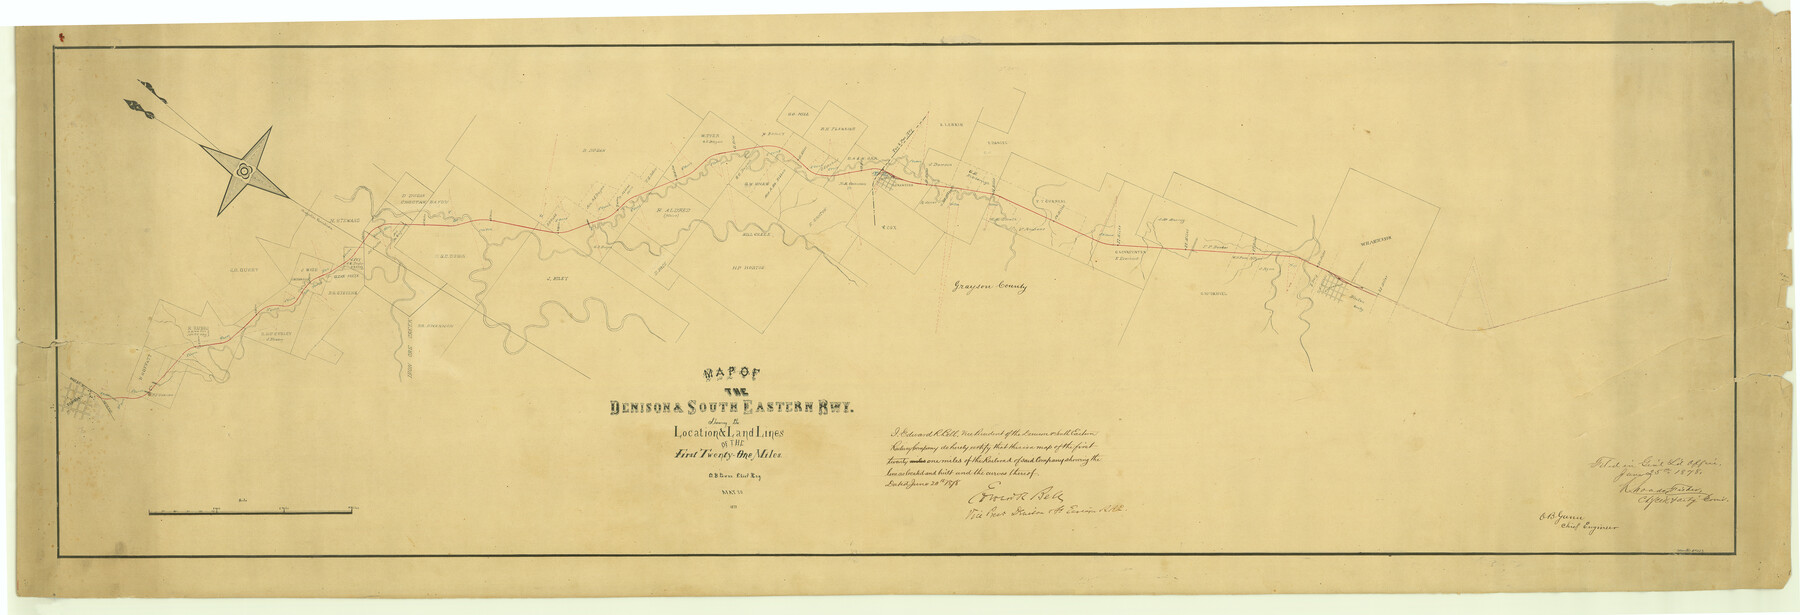 64023, Map of the Denison & South Eastern Rwy. showing the Location & Land Lines of the First Twenty-One Miles, General Map Collection